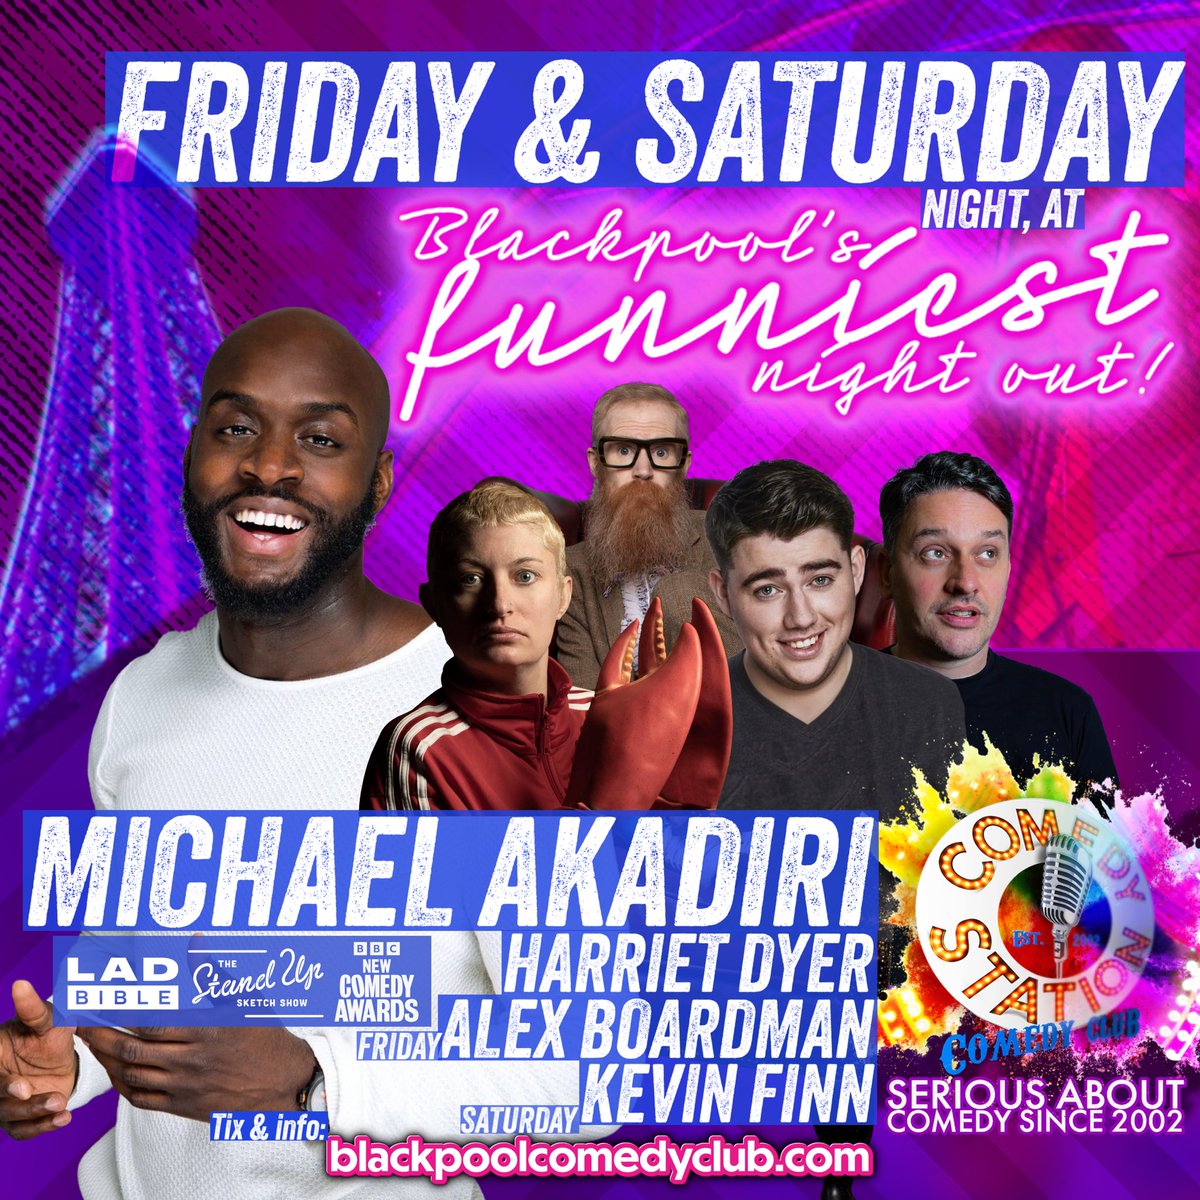 Check out what we’ve got for you this Friday & Saturday night, in Blackpool! Tix & info: blackpoolcomedyclub.com